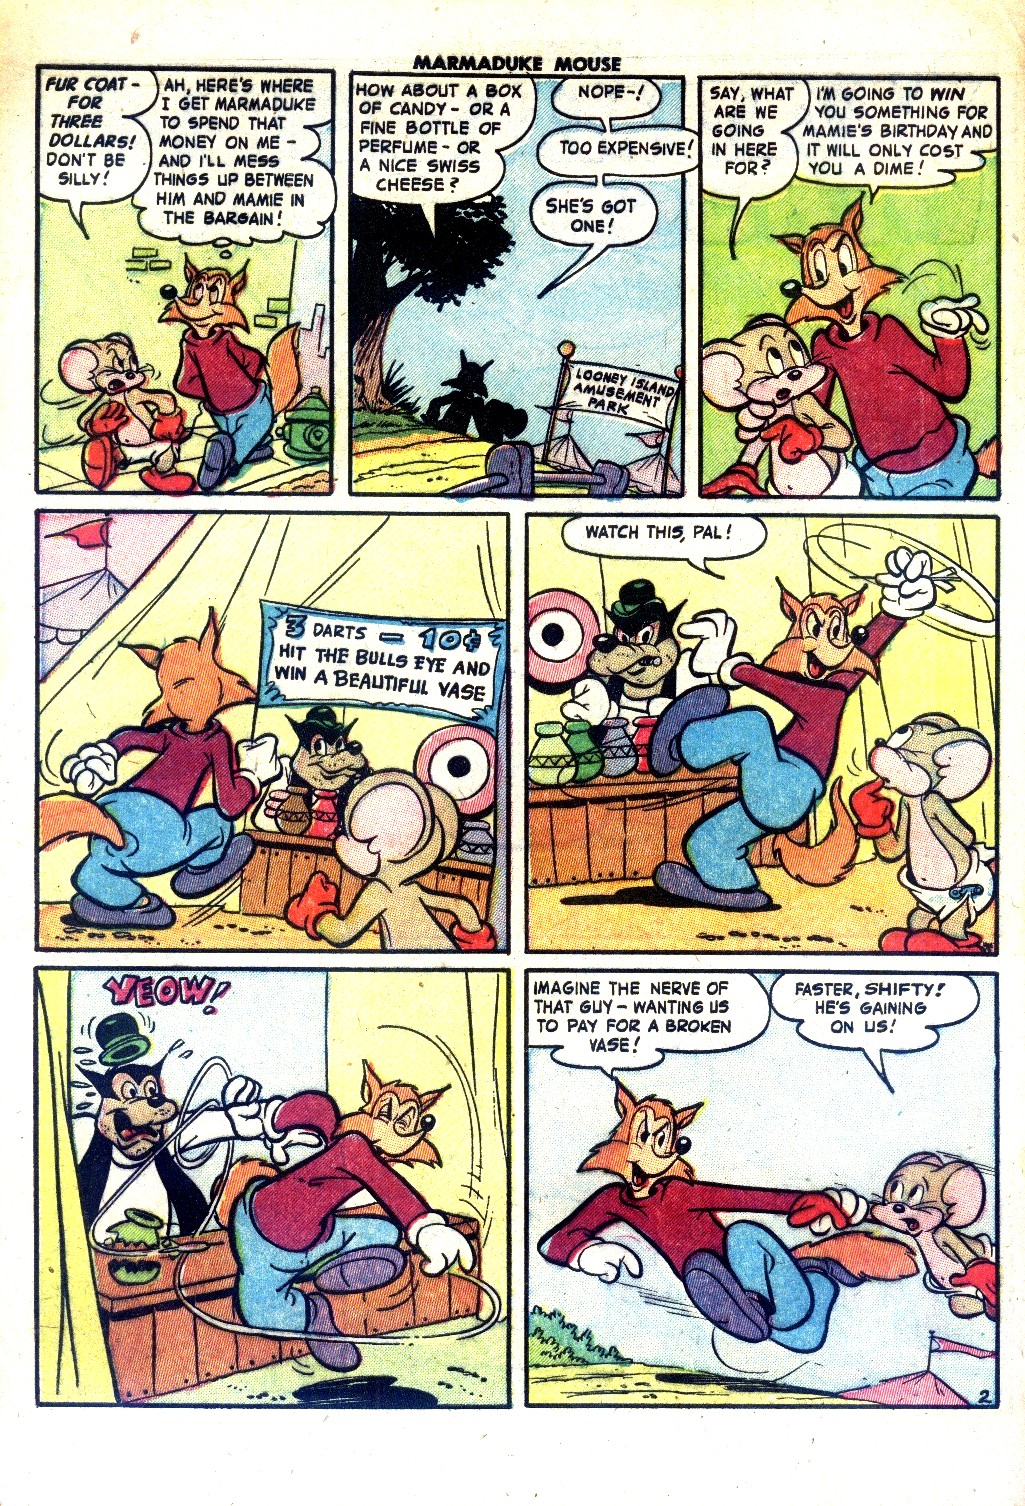 Read online Marmaduke Mouse comic -  Issue #40 - 4